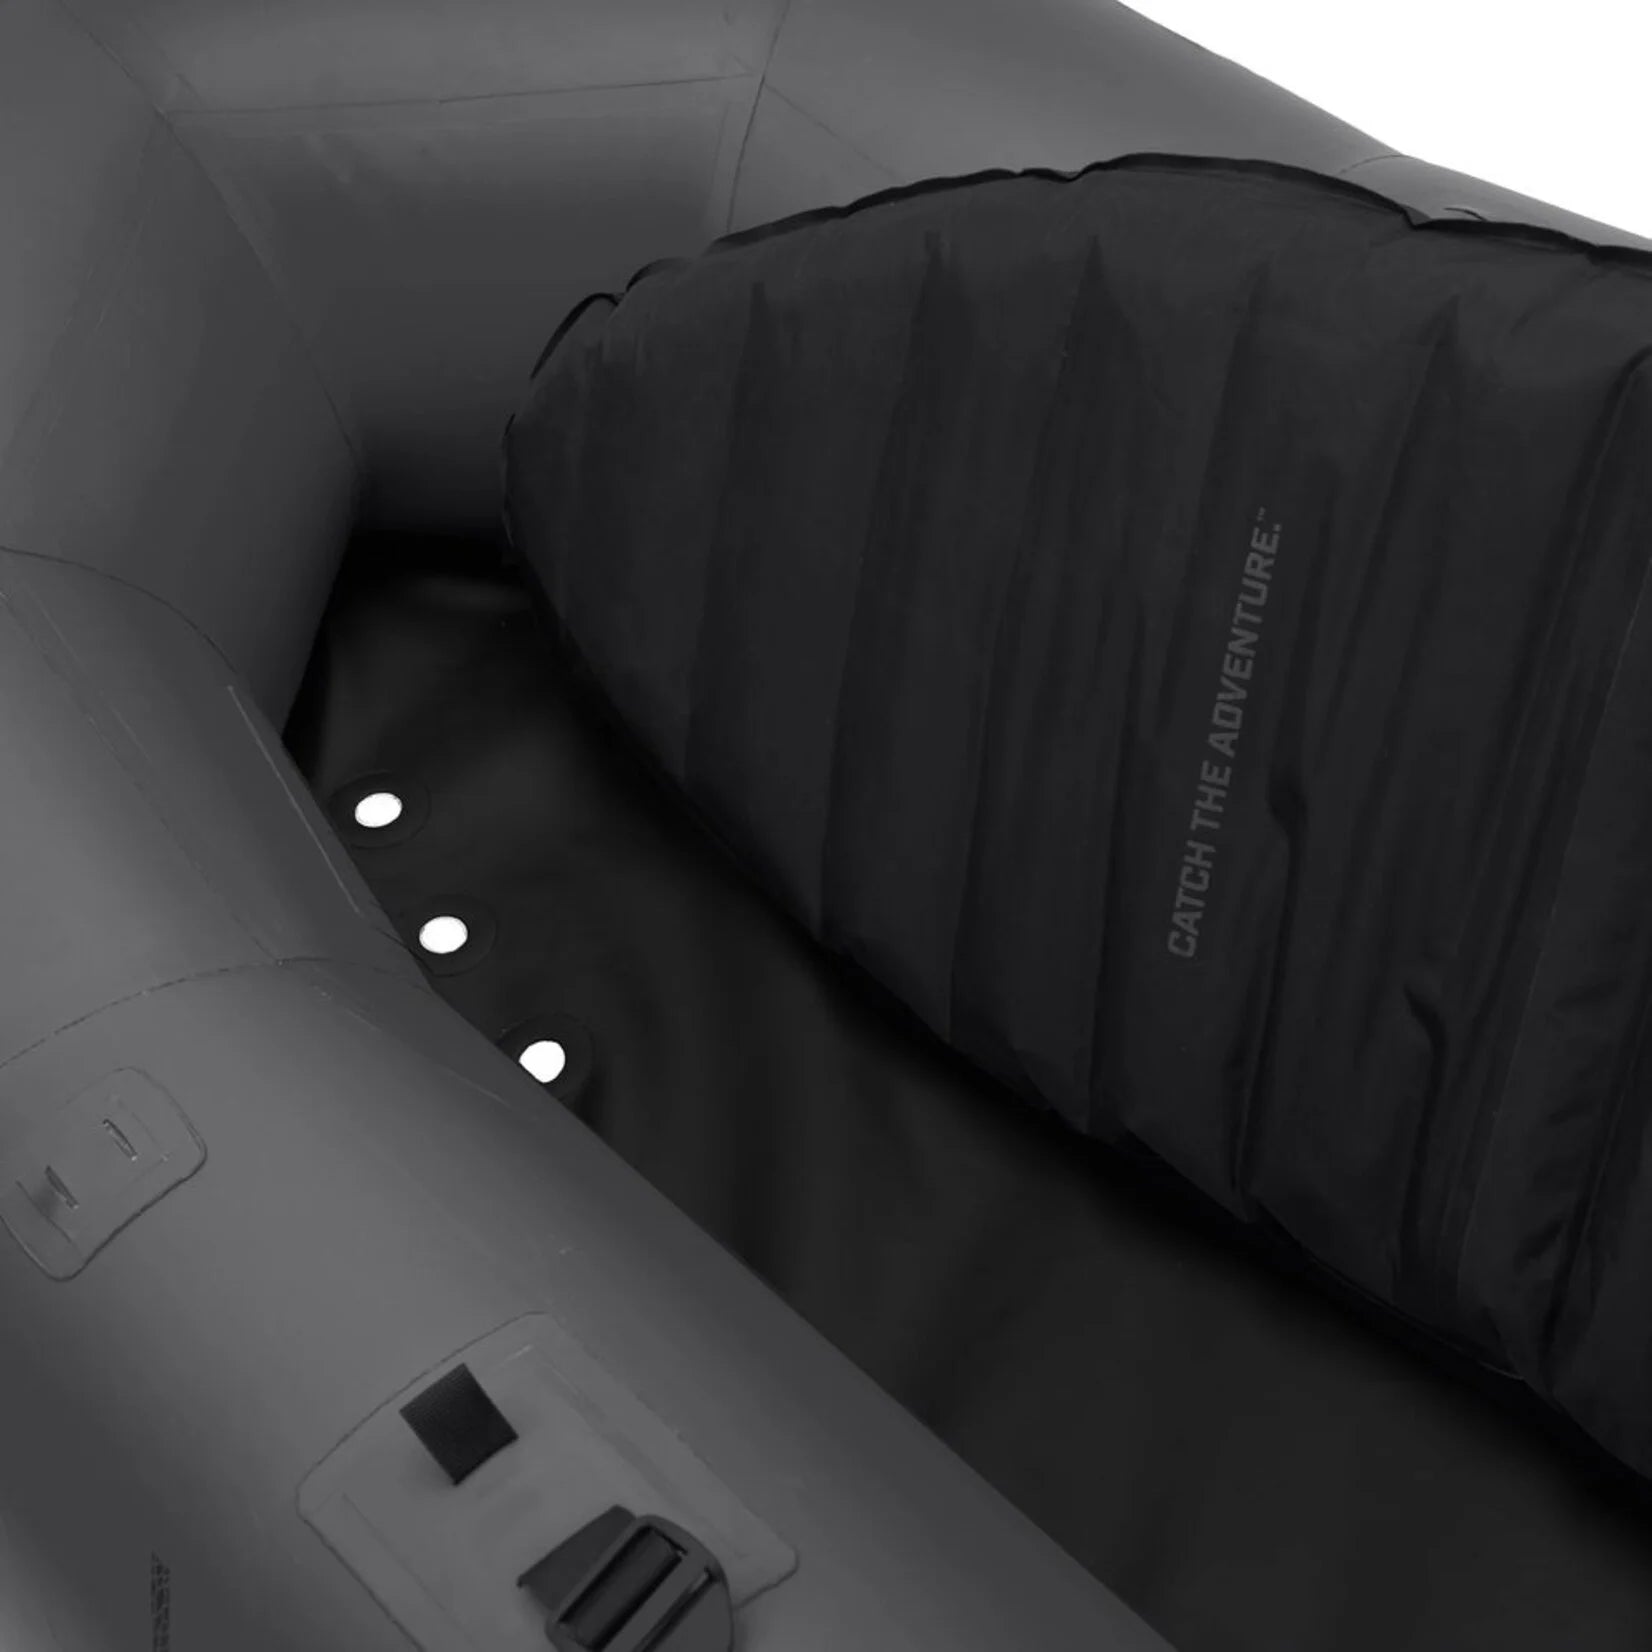 An Riffle Fishing Packraft with a black seat is designed for remote waters.